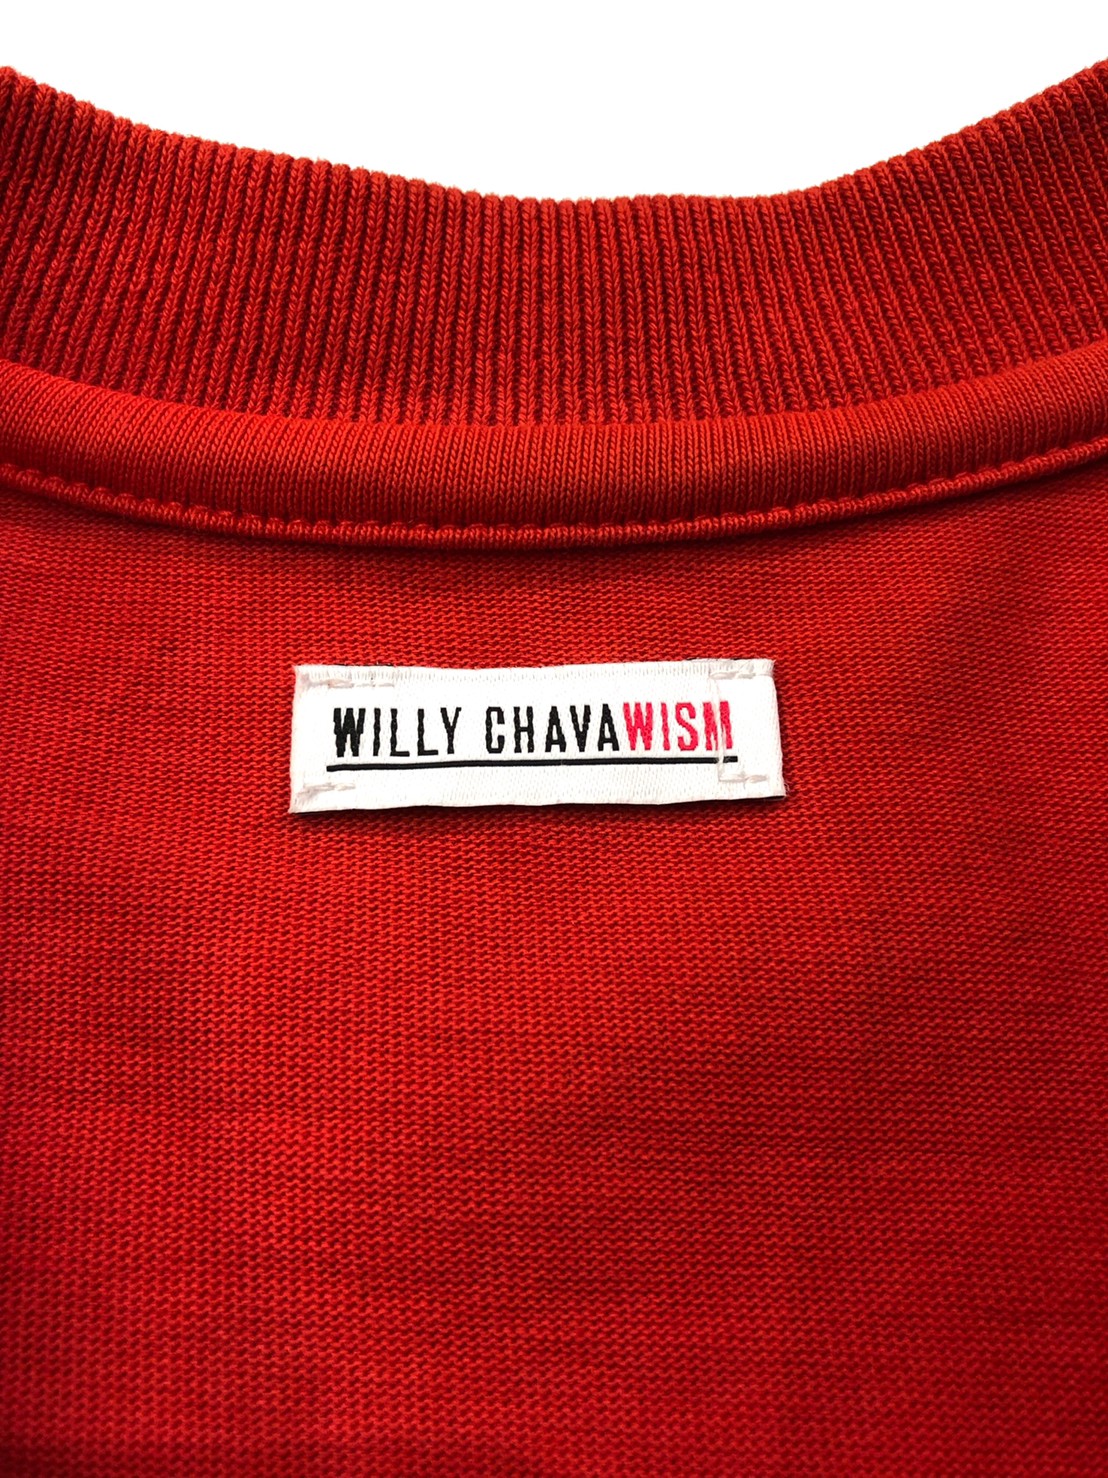 WILLY CHAVAWISM﻿﻿